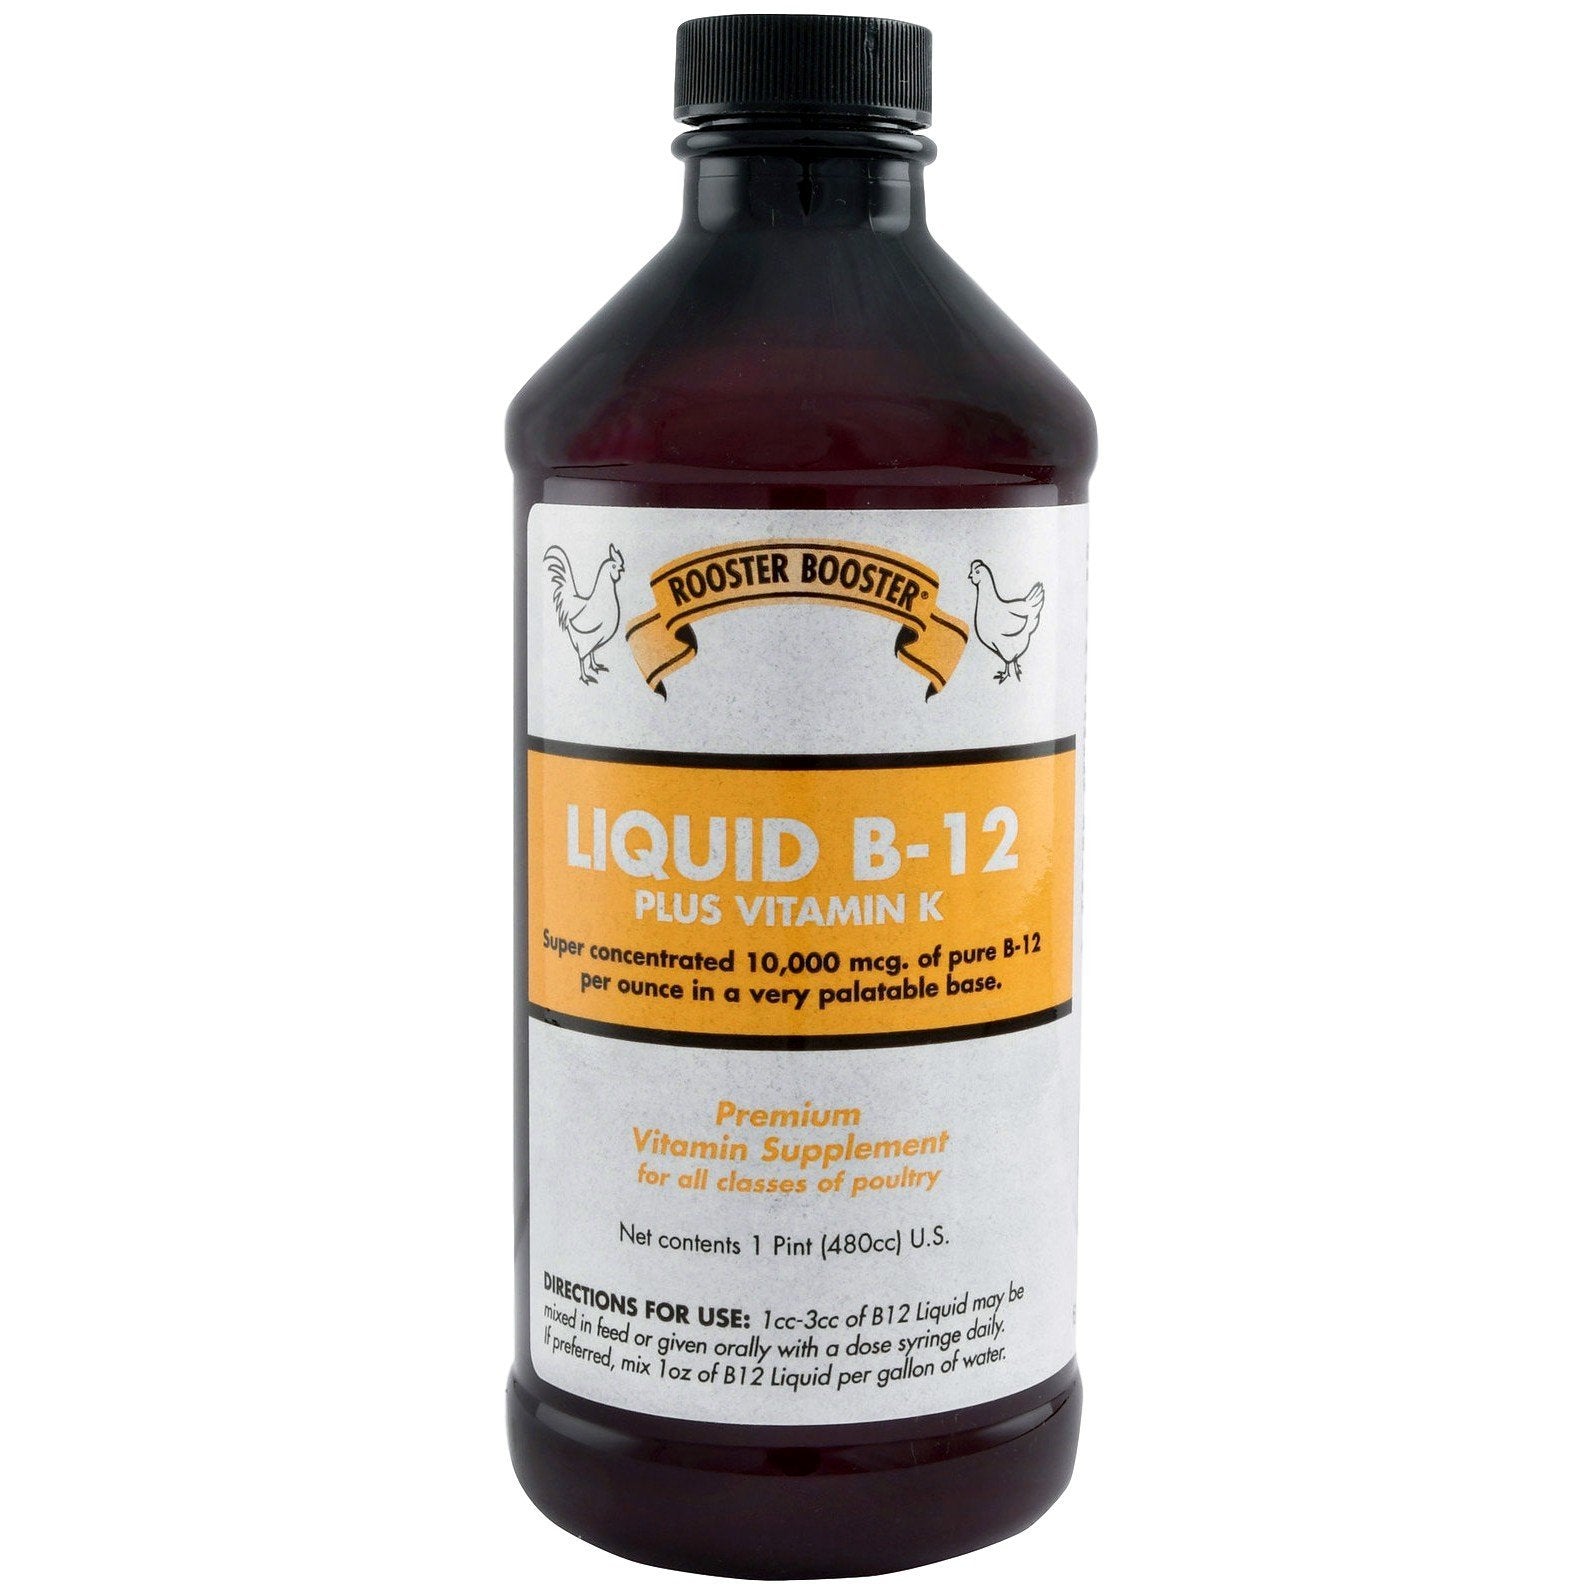 Onophoudelijk Paard lading BirdPal Products- Liquid Vitamin B-12 Super Concentrated